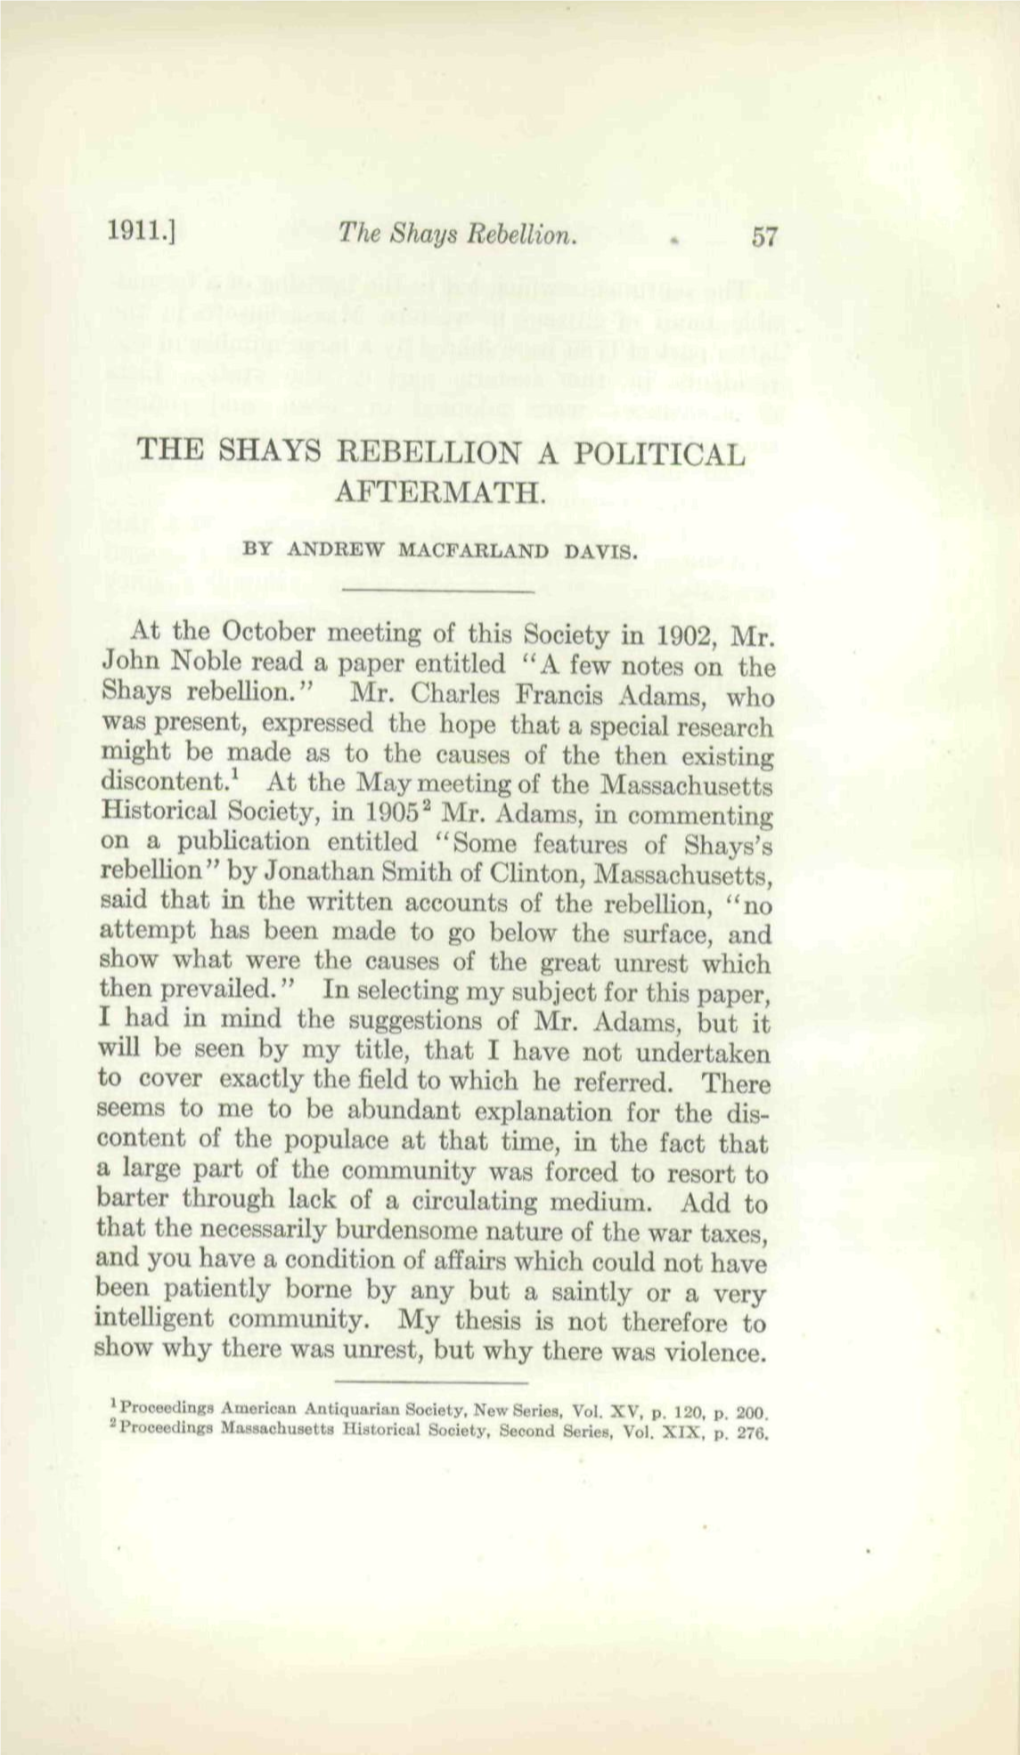 The Shays Rebellion a Political Aftermath